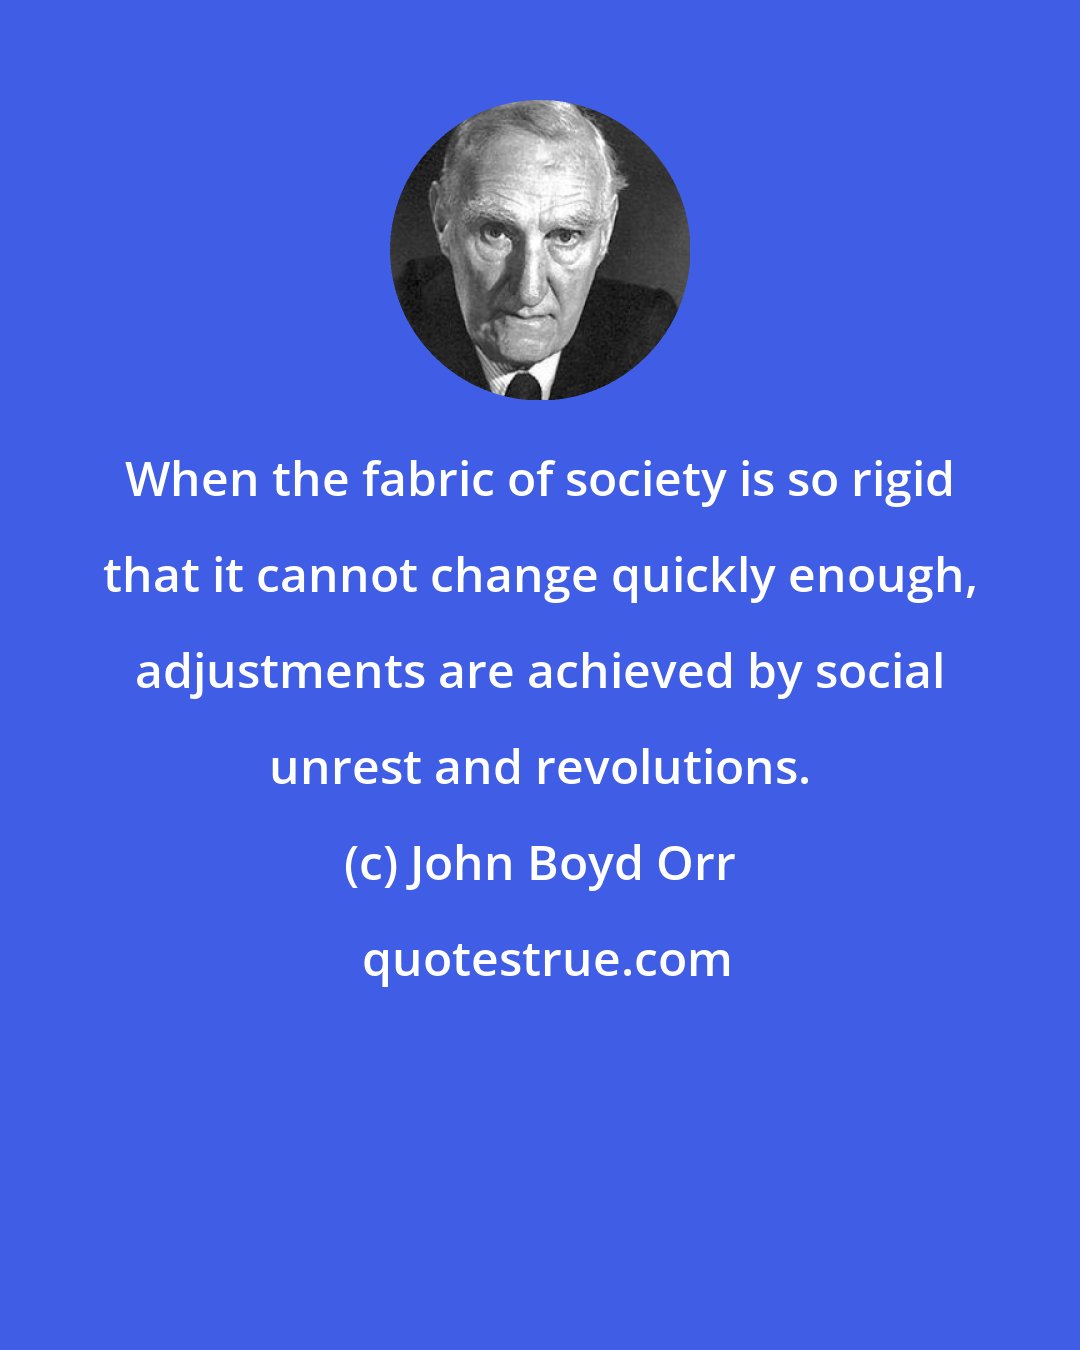 John Boyd Orr: When the fabric of society is so rigid that it cannot change quickly enough, adjustments are achieved by social unrest and revolutions.